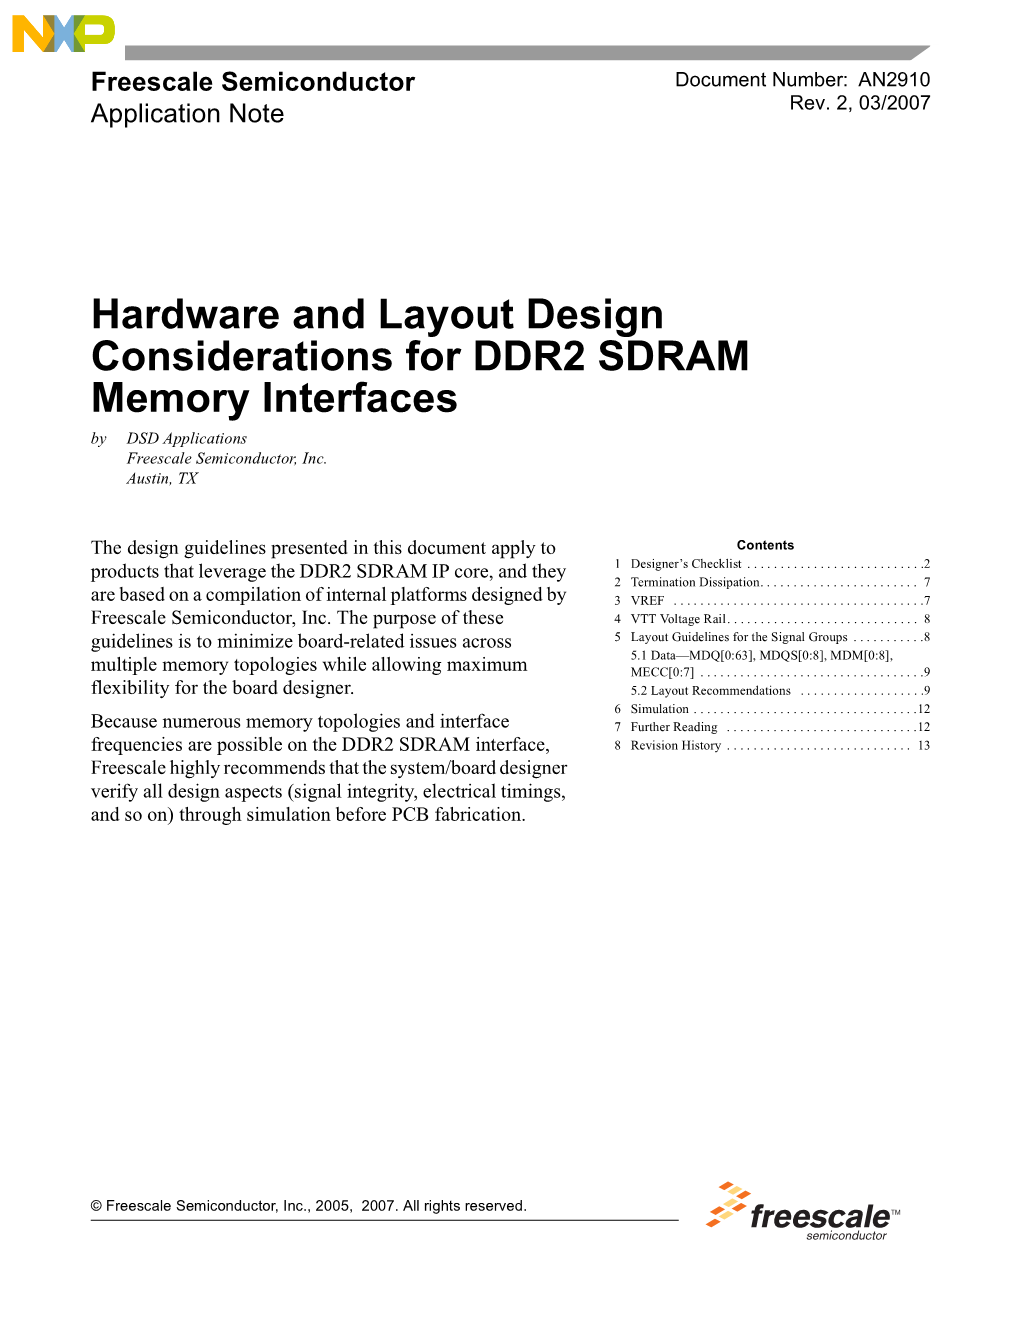 Hardware and Layout Design Considerations for DDR2 SDRAM Memory Interfaces by DSD Applications Freescale Semiconductor, Inc